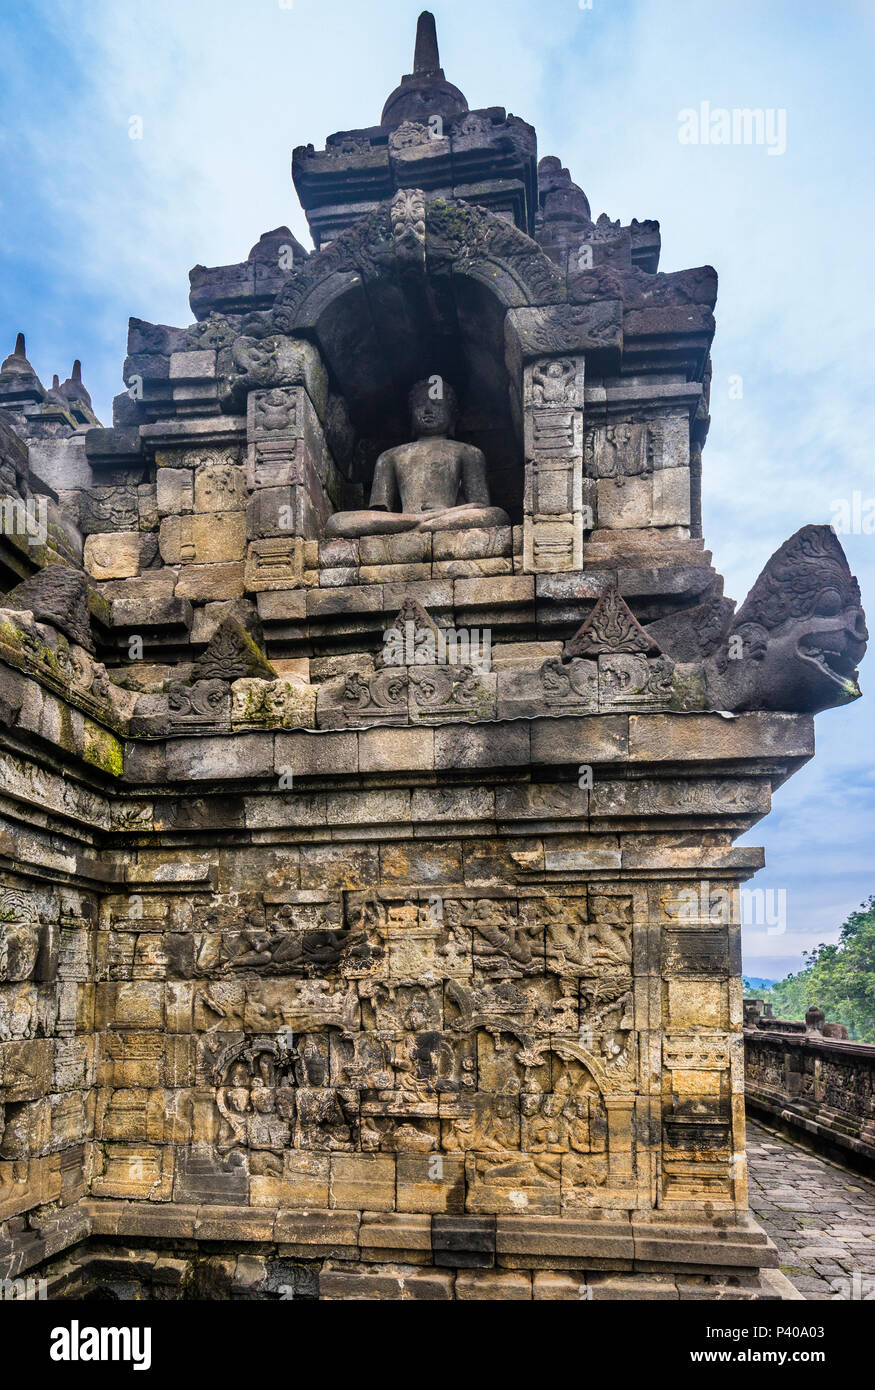 sitting Buddha statue in a niche above bas-reliefs at 9th century Borobudur Buddhist temple, Central Java, Indonesia Stock Photo